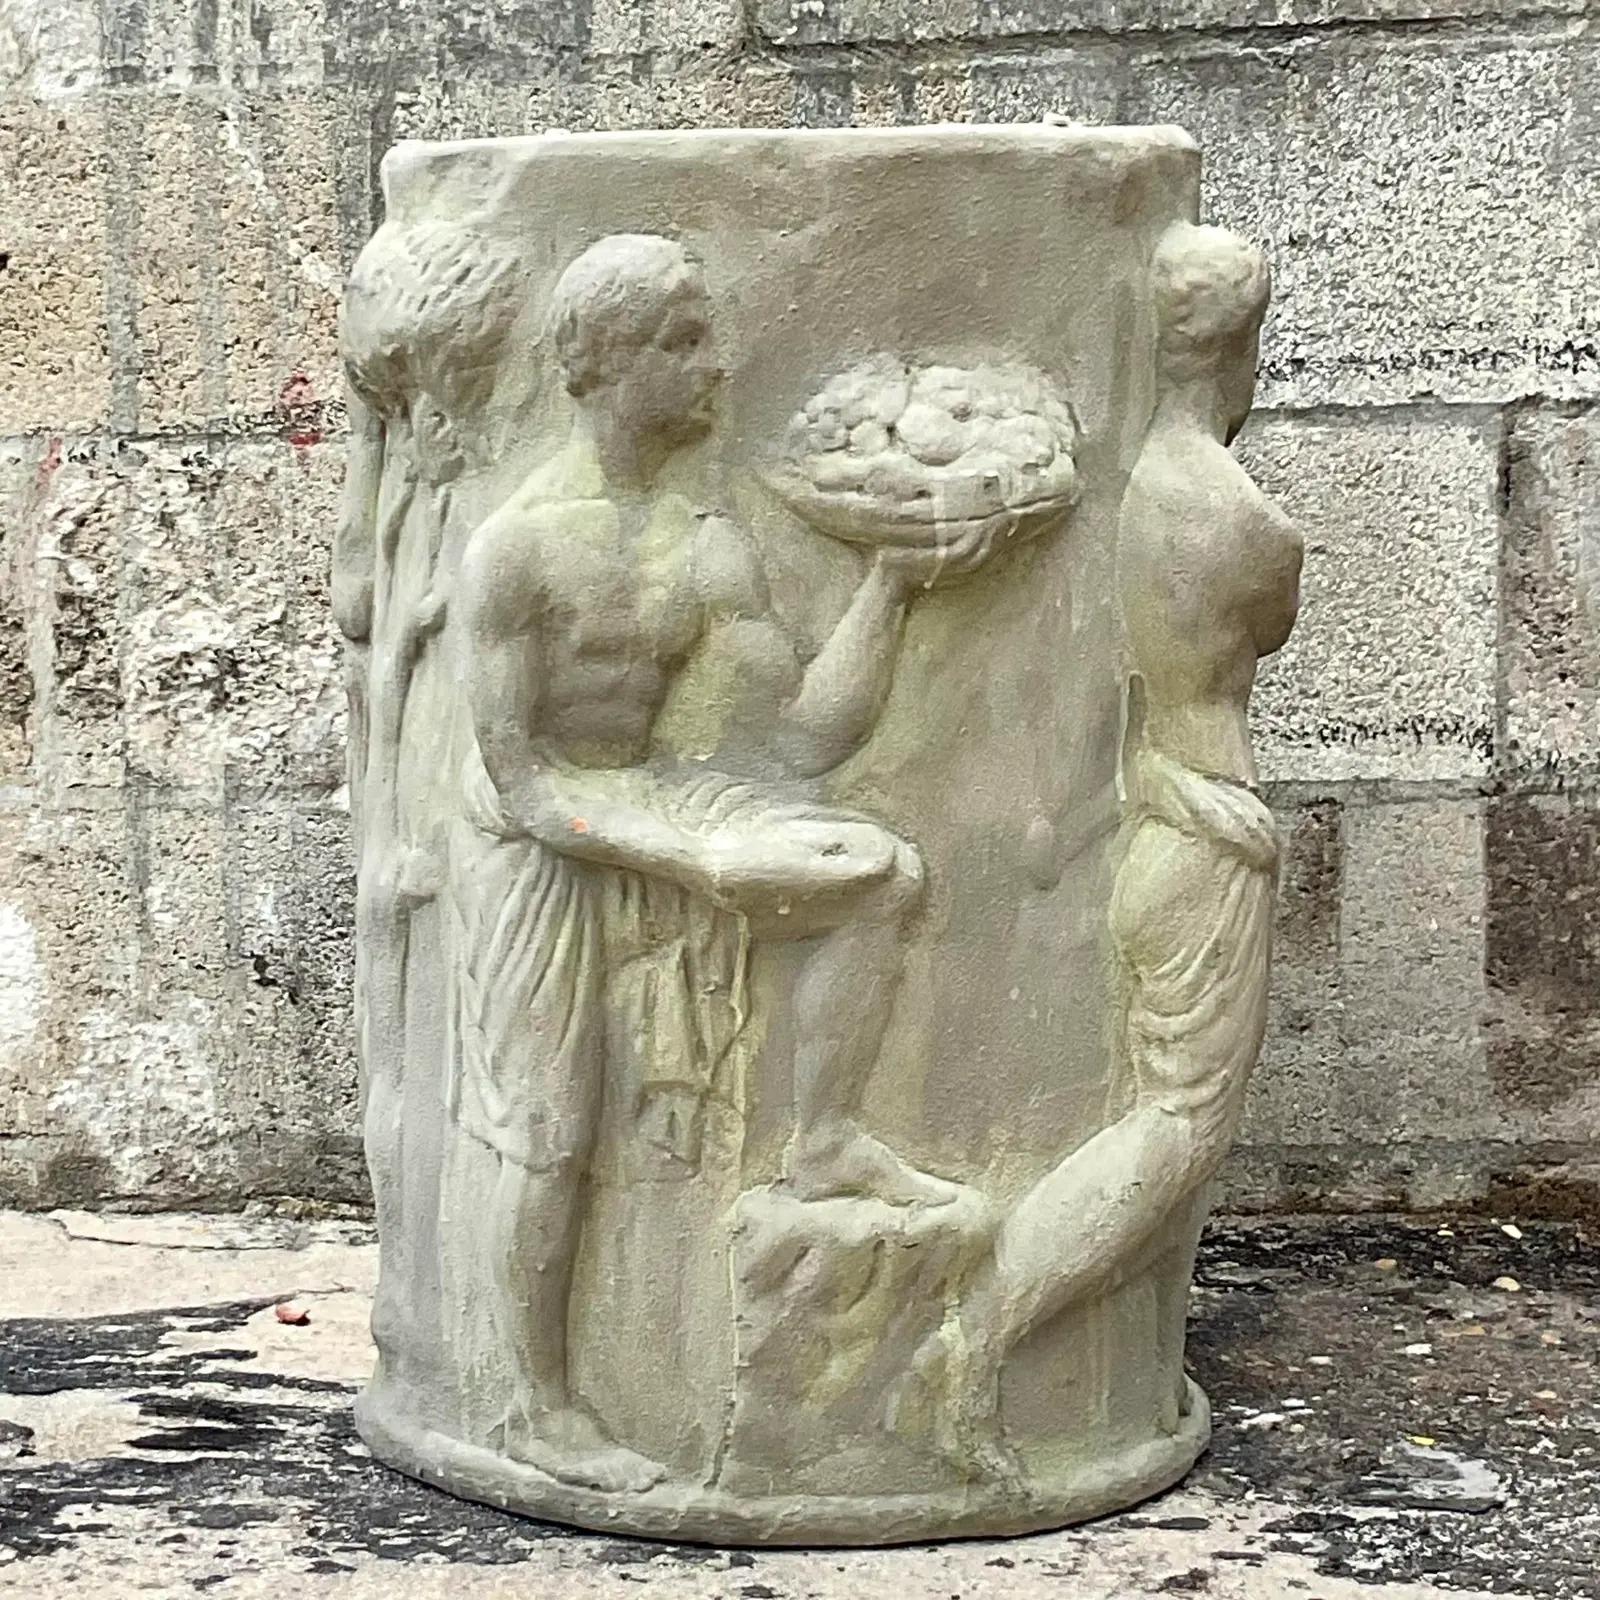 A really fabulous vintage case concrete table pedestal. A beautiful relief with a Grand Tour design. A parade of characters in various costume. Acquired from a Palm Beach estate.